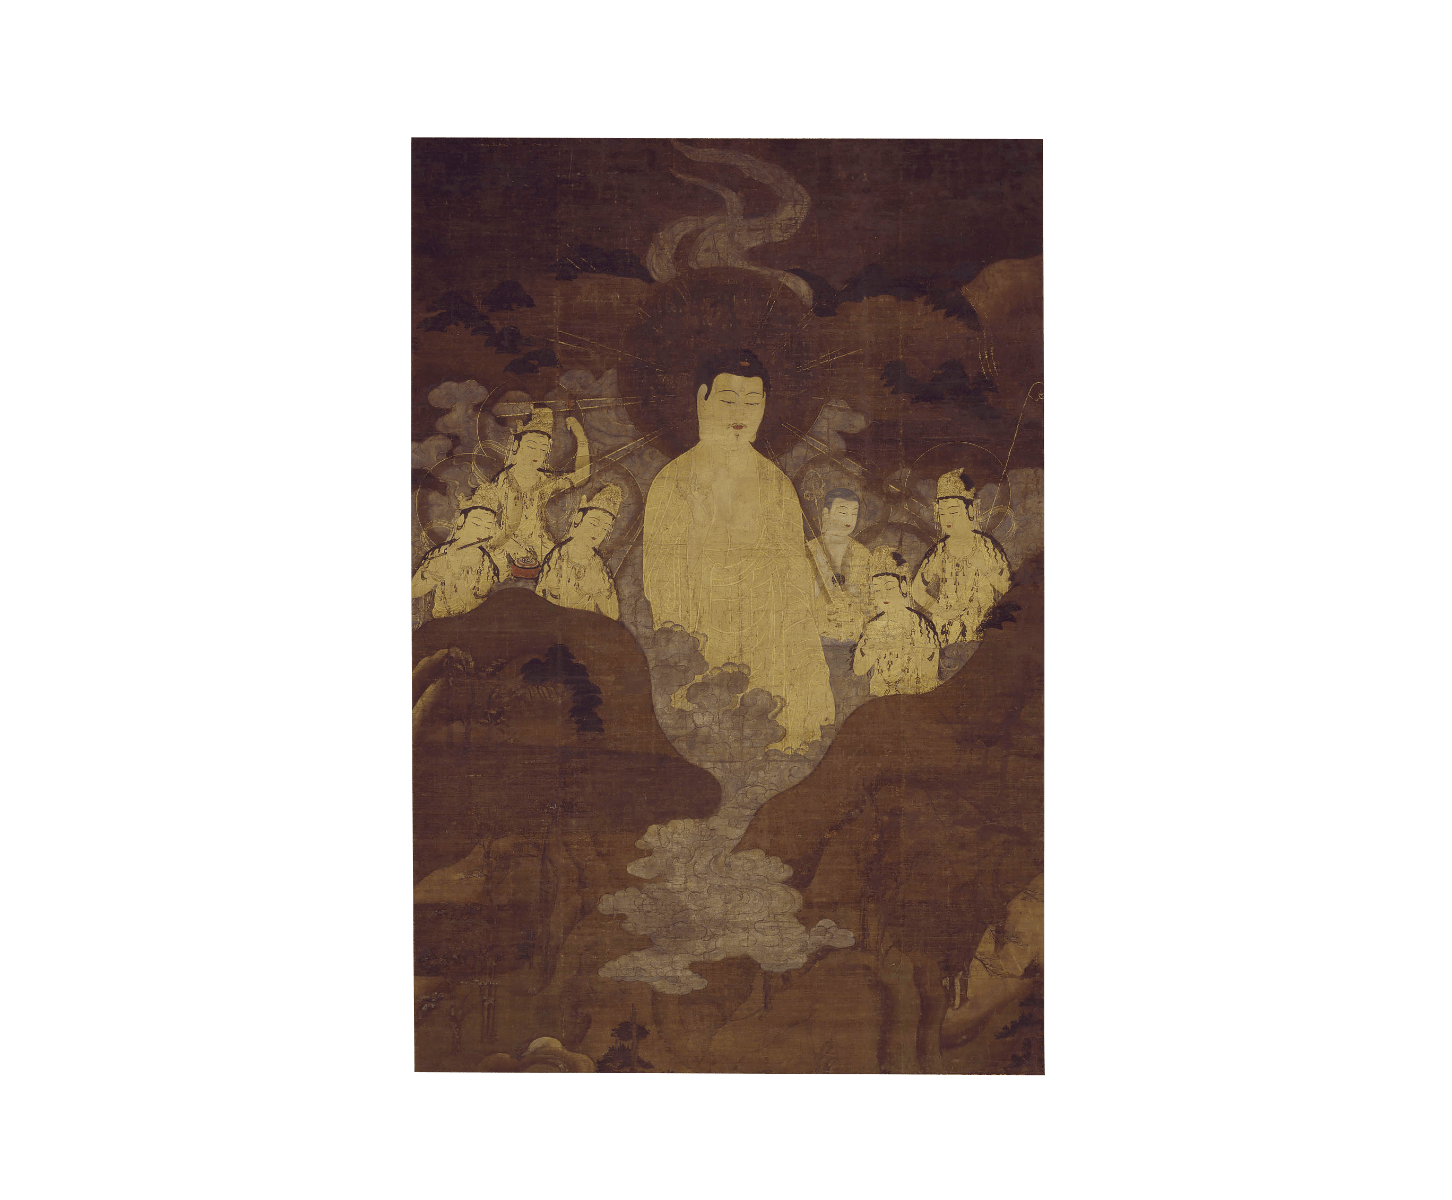 Amida (Amitābha) Coming over the Mountains 13th century